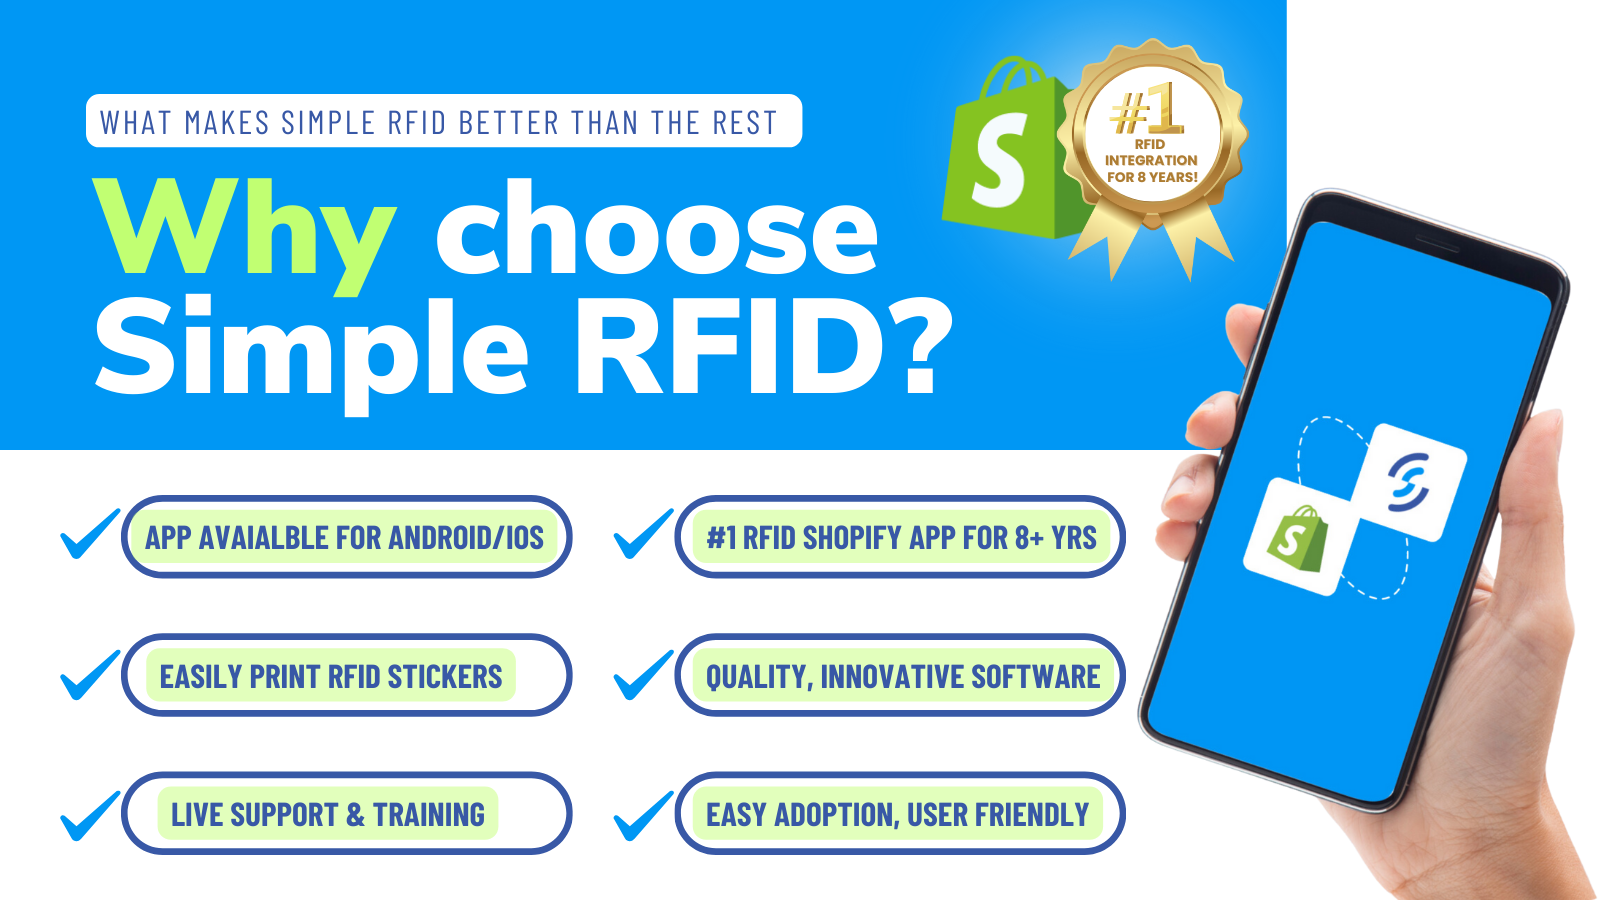 #1 Shopify App for 8+ Years on IOS/Android | Print RFID Stickers